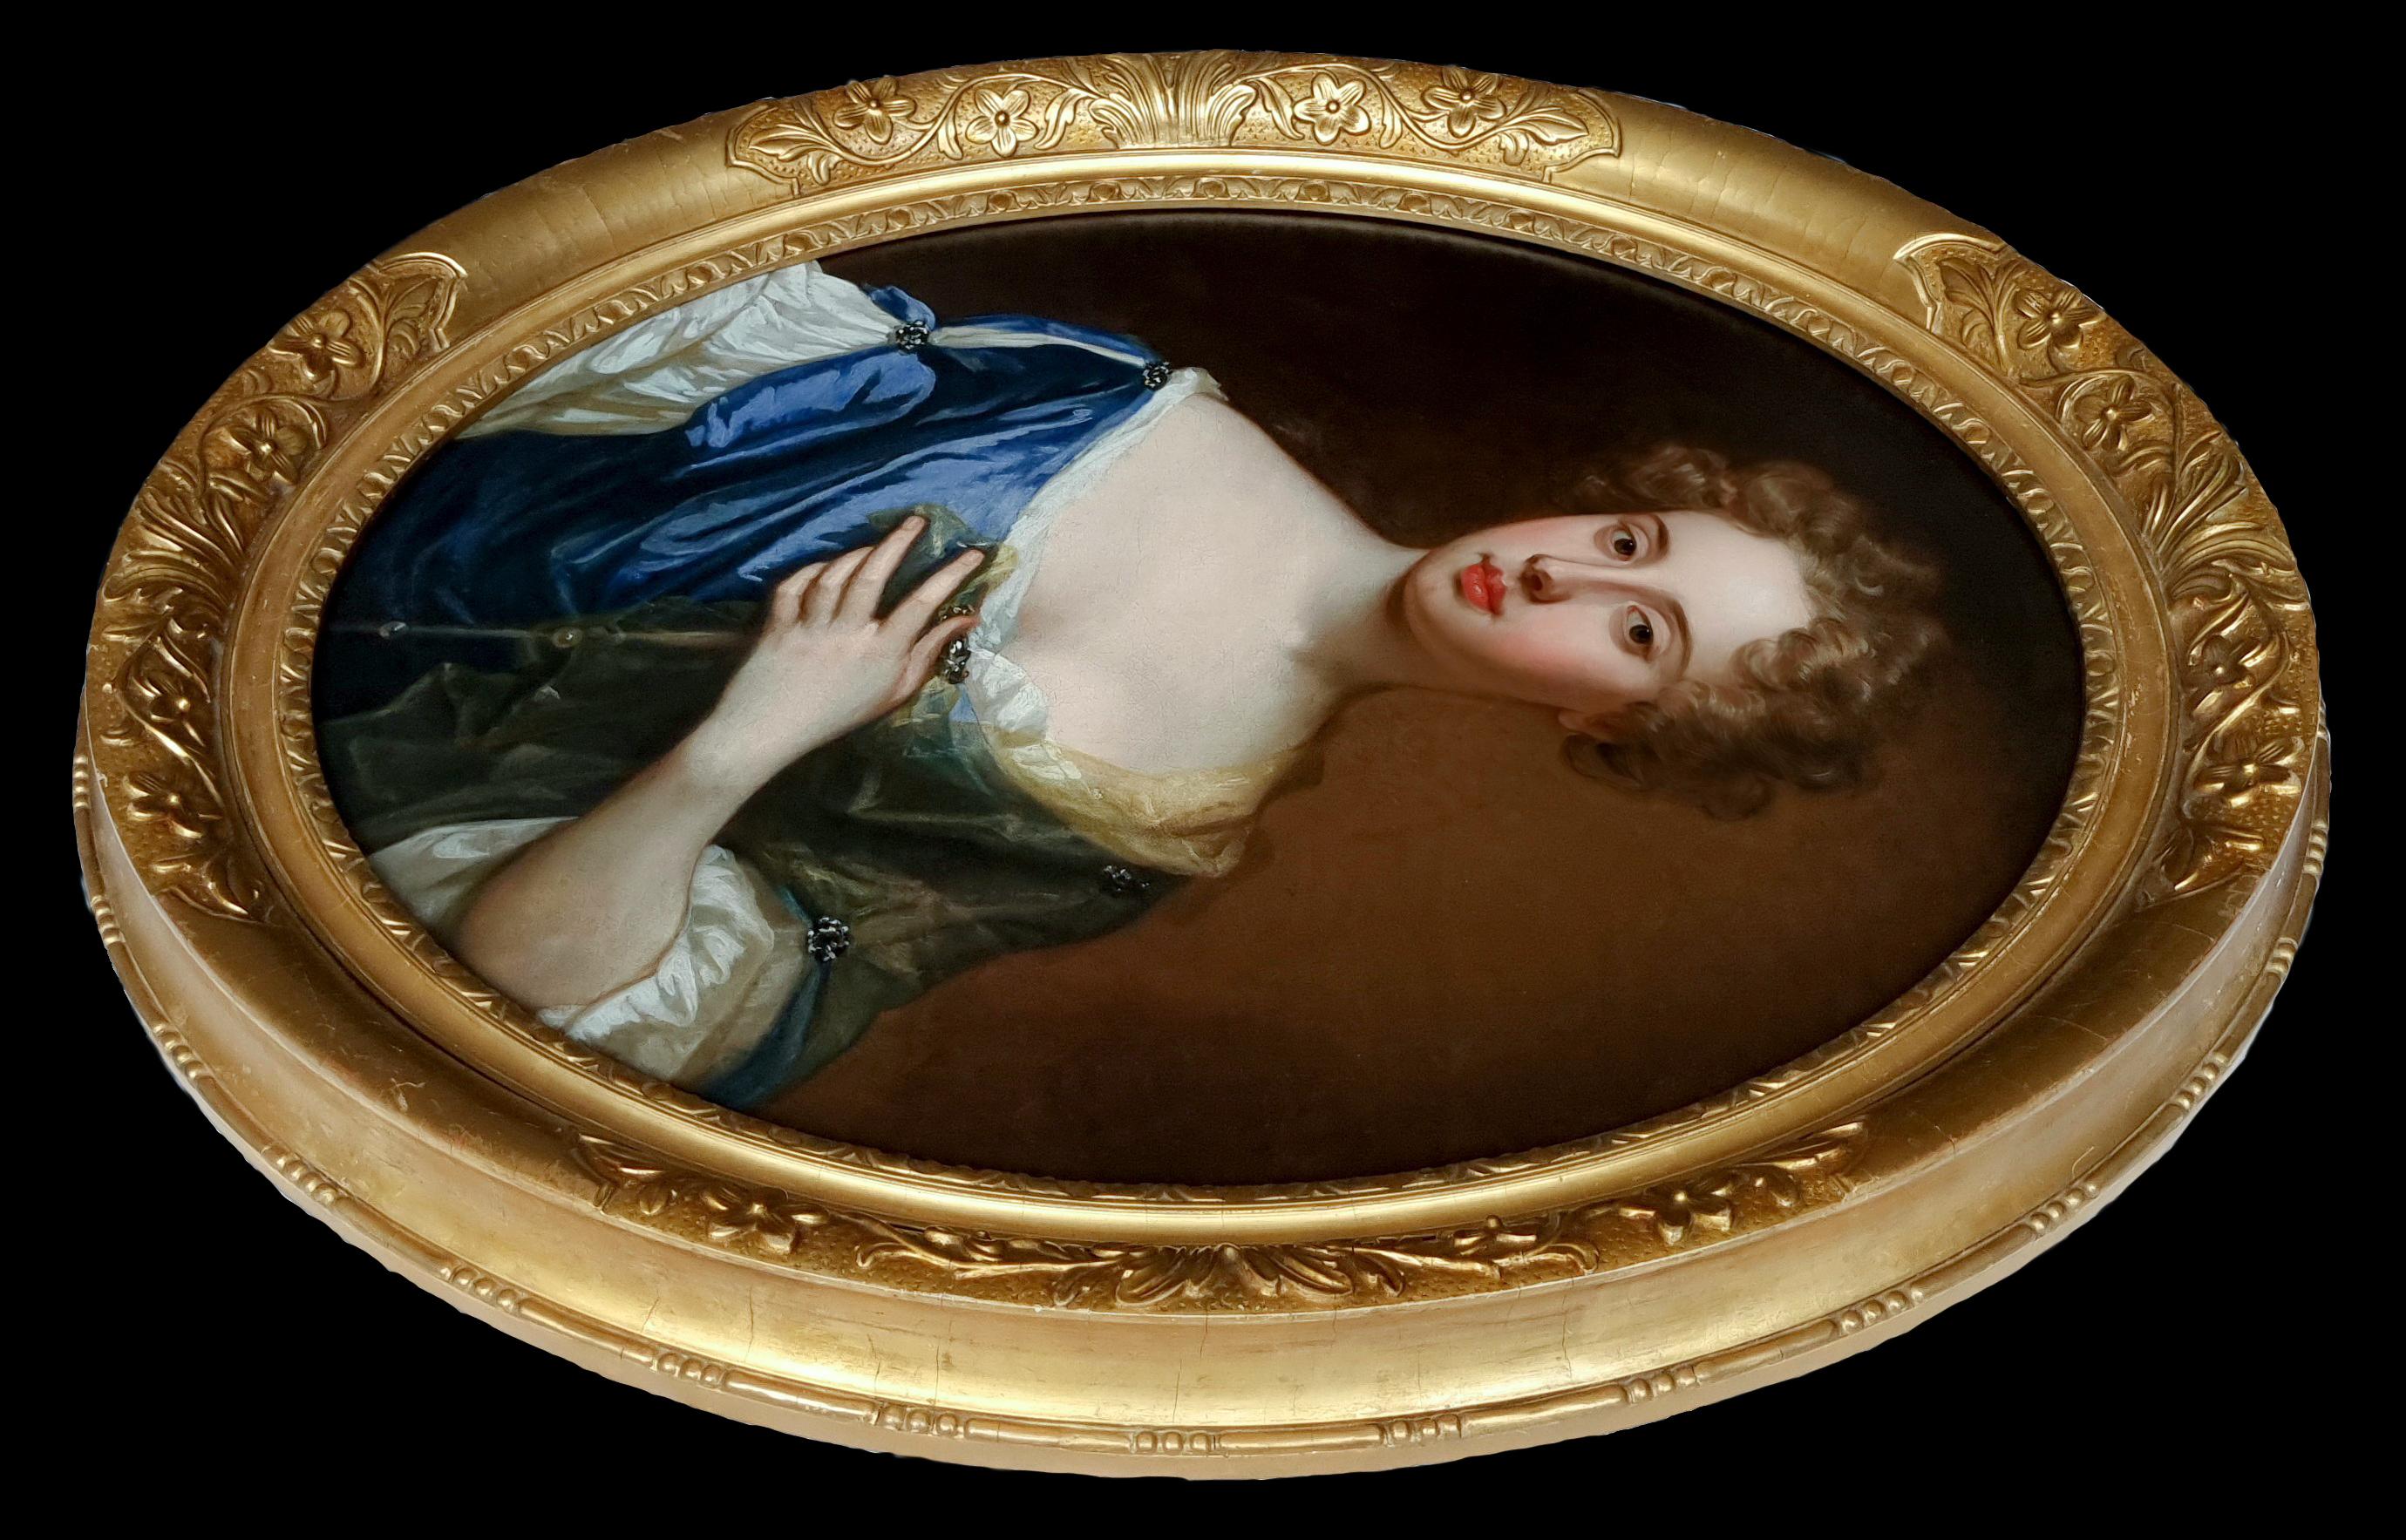 Portrait of a Lady in a Blue Gown Holding a Sheer Scarf c.1675-85, Oil on canvas For Sale 6